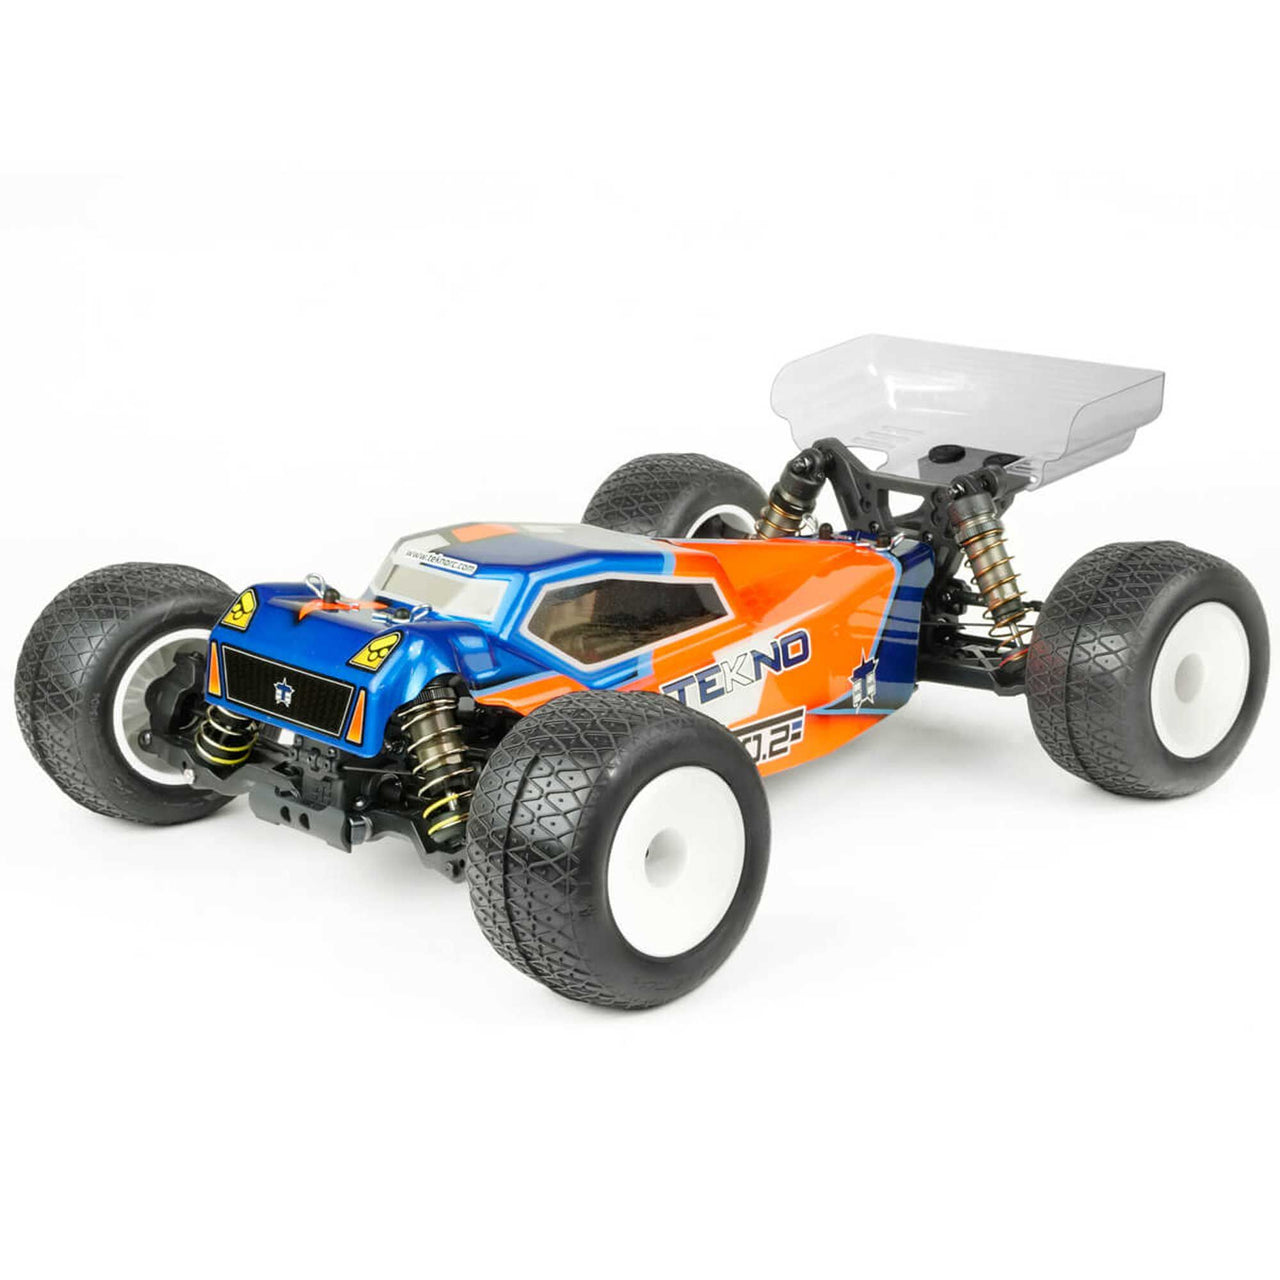 TKR7202 1/10 ET410.2 4WD Competition Electric Truggy Kit